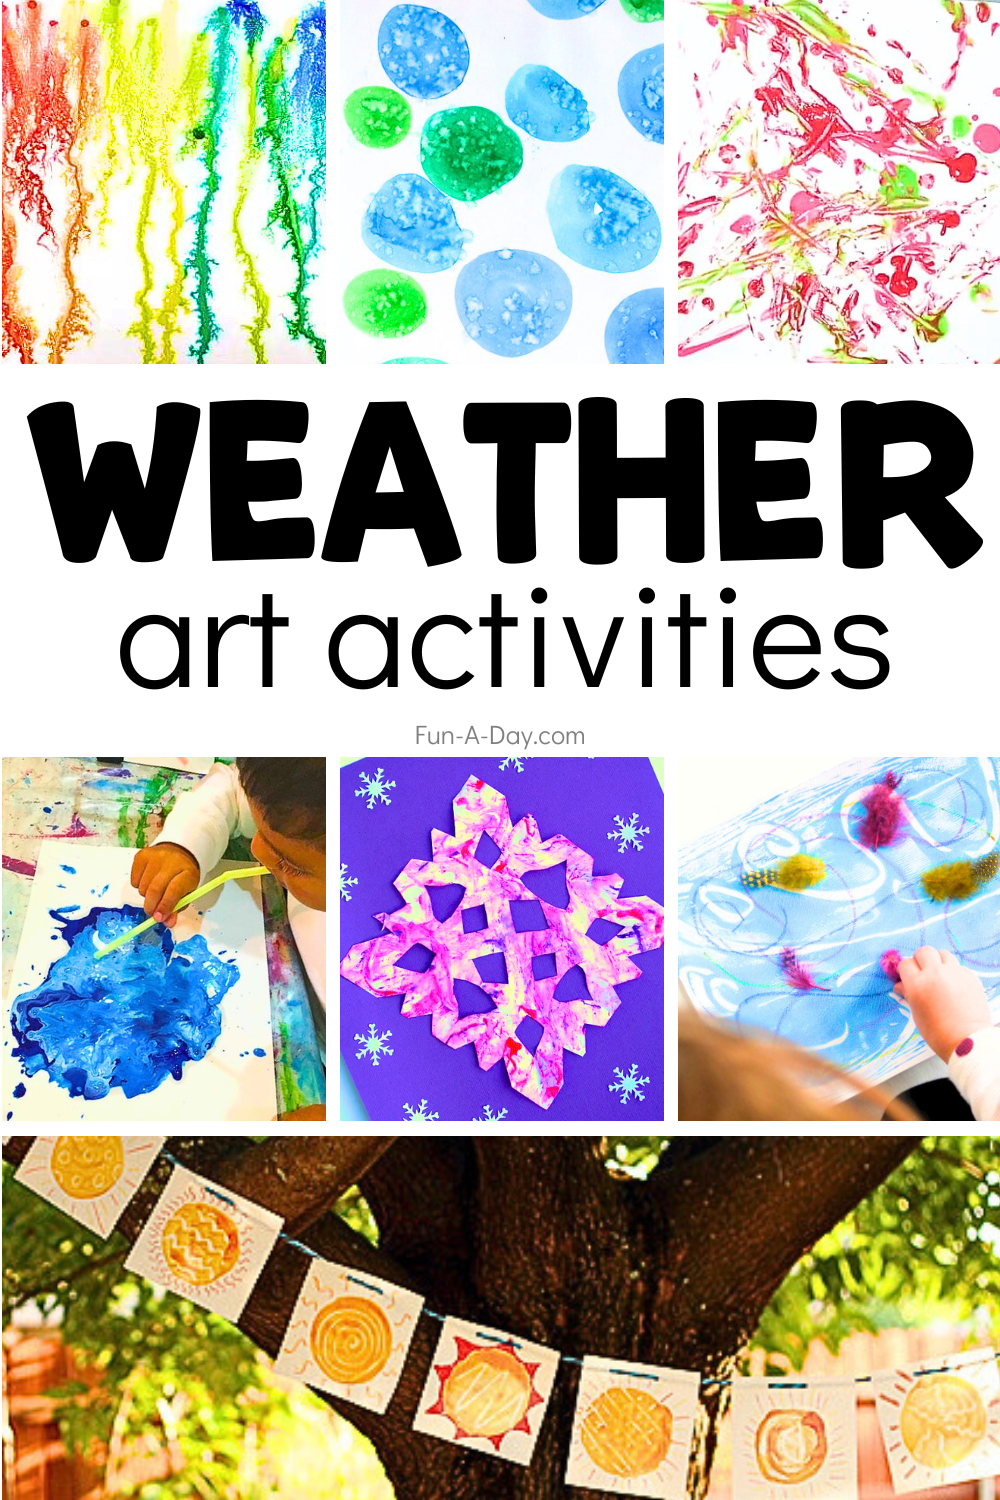 7 weather art project ideas with text that reads weather art activities.